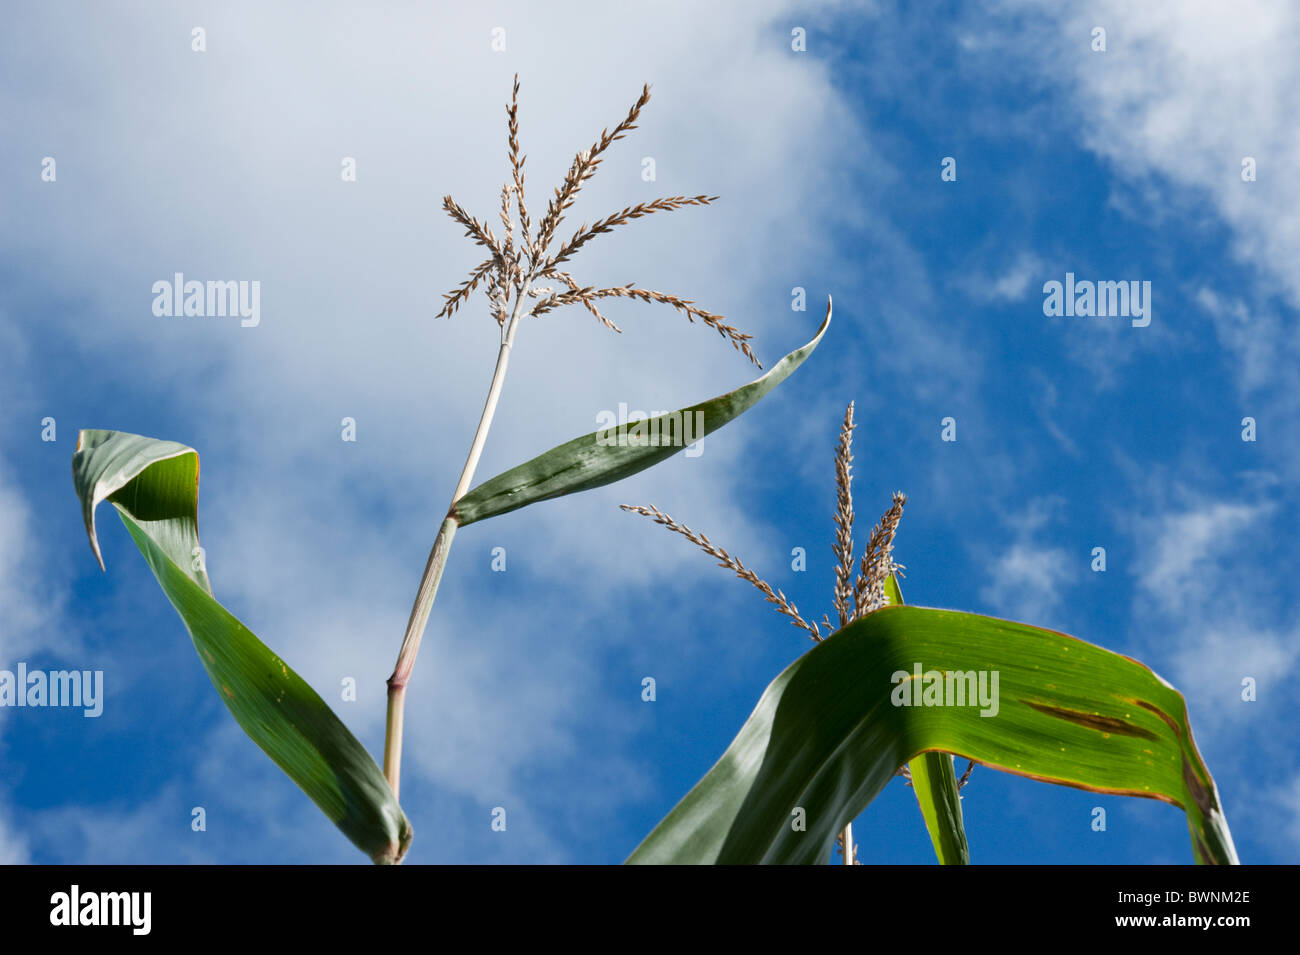 Corn tassels (male flowers) against a blue sky with white clouds. Stock Photo